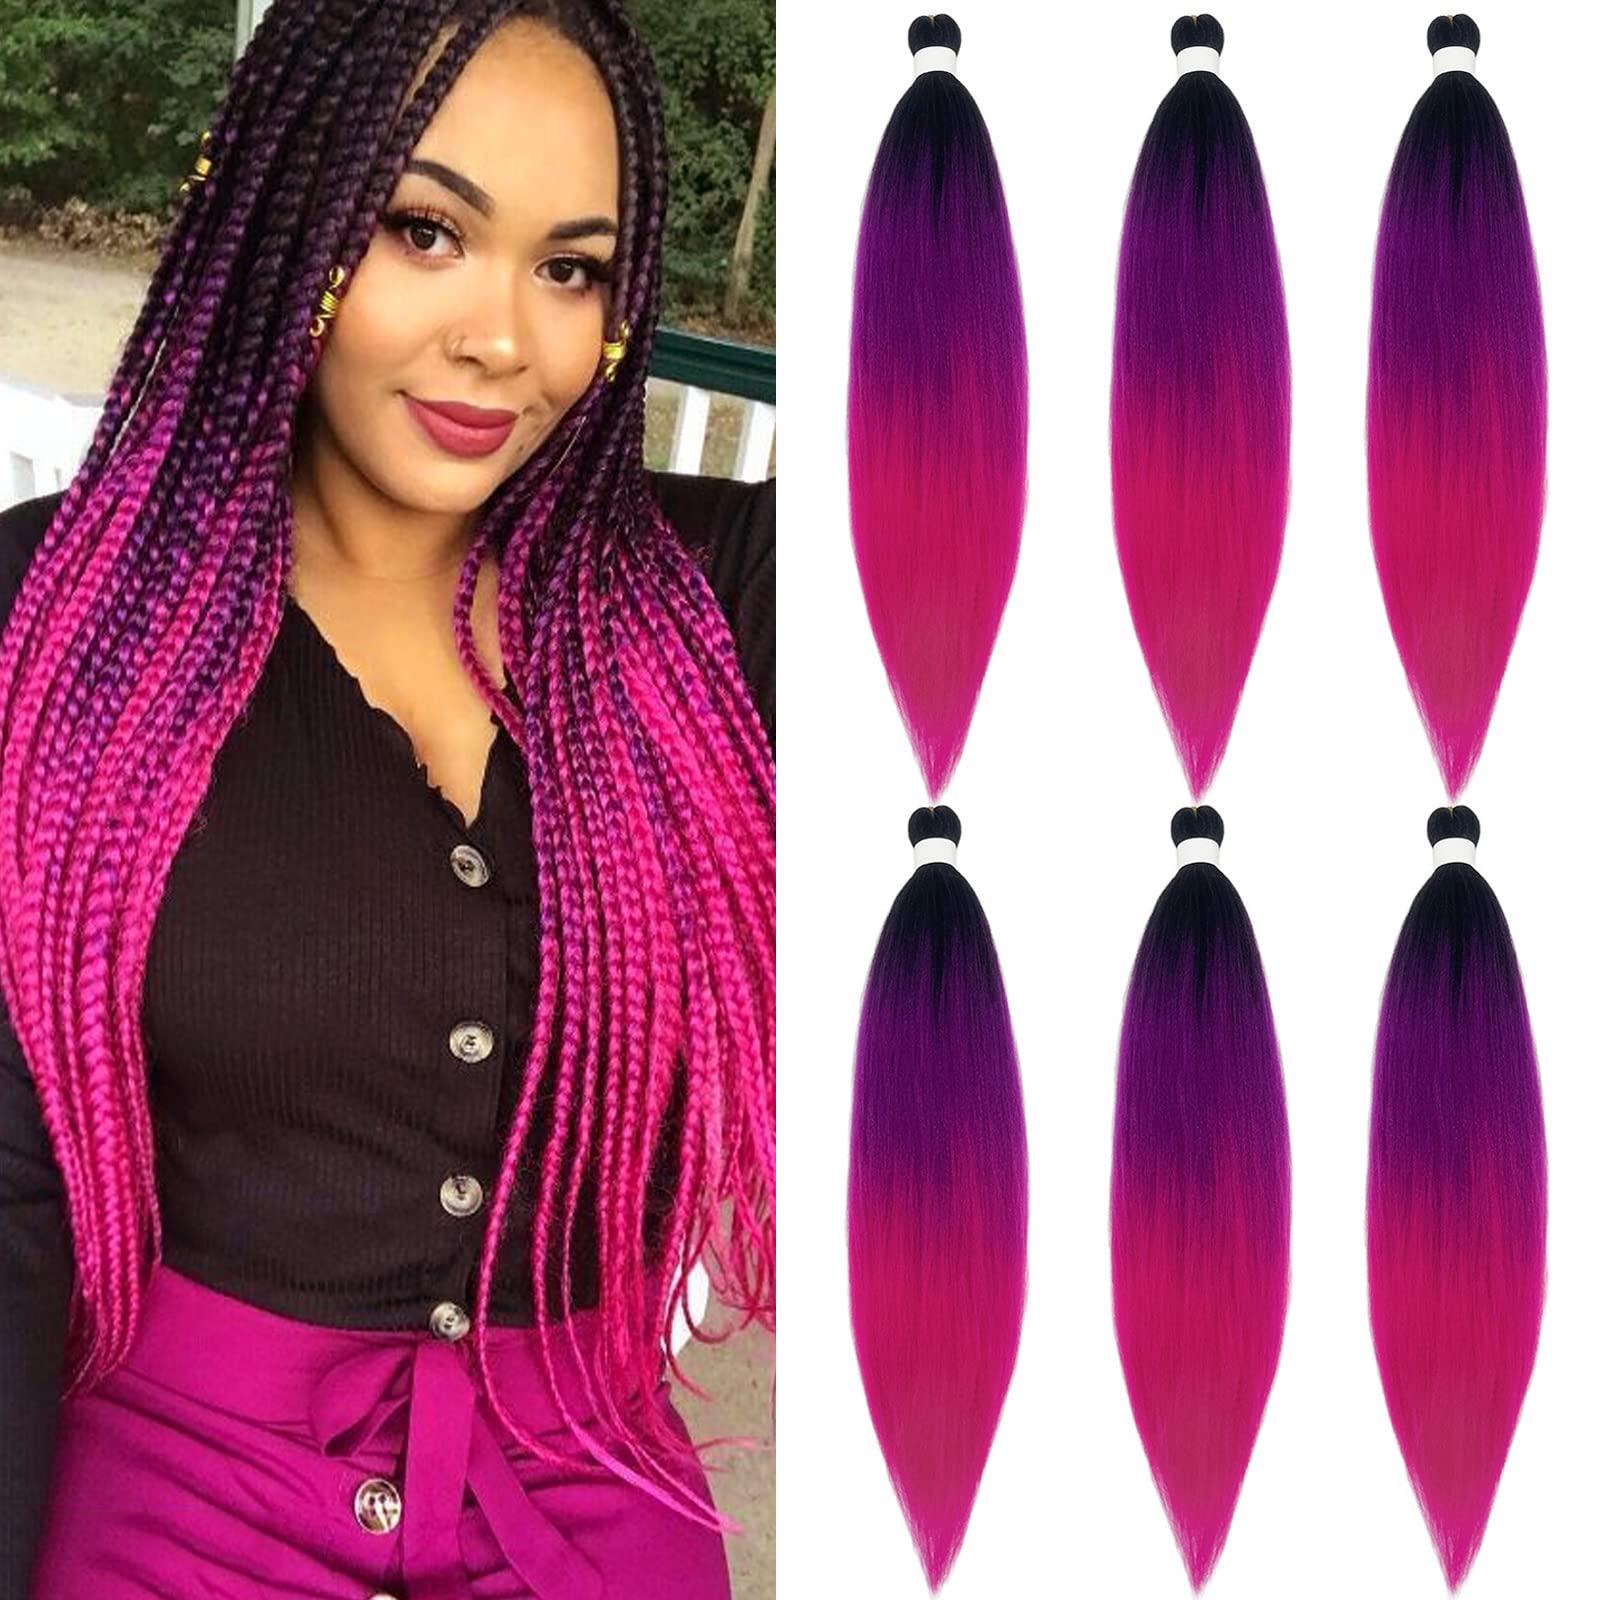  UPruyo Prestretched Pre Stretched Neon Mint Green Braiding  Hair Extensions For Braids Kanekalon Weave Colored Braiding Hair Pre  Stretched Fake Hair For Braiding